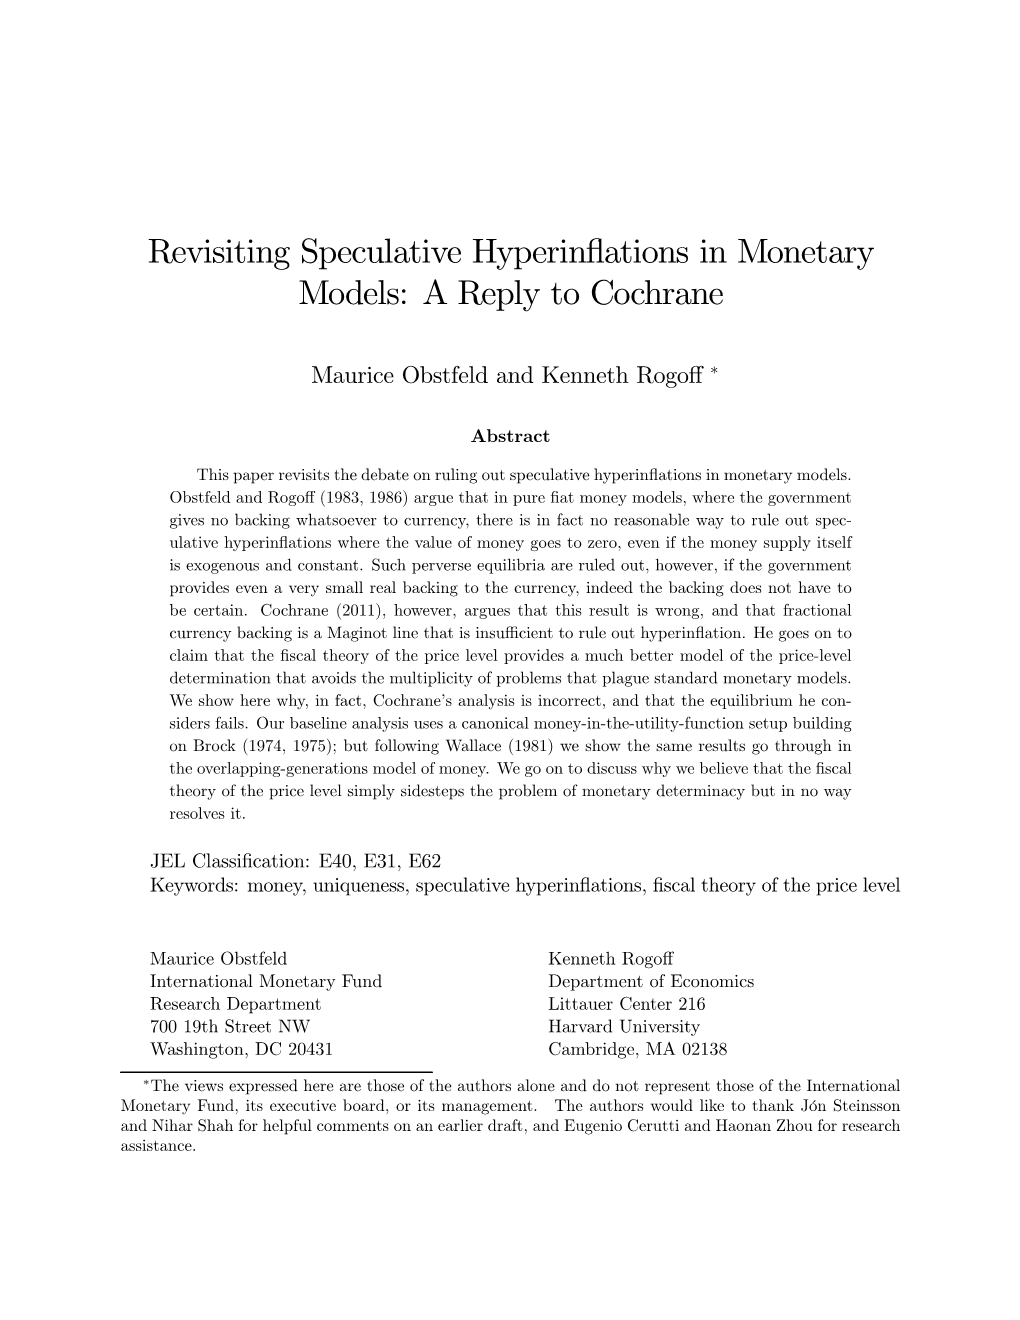 Revisiting Speculative Hyperinflations in Monetary